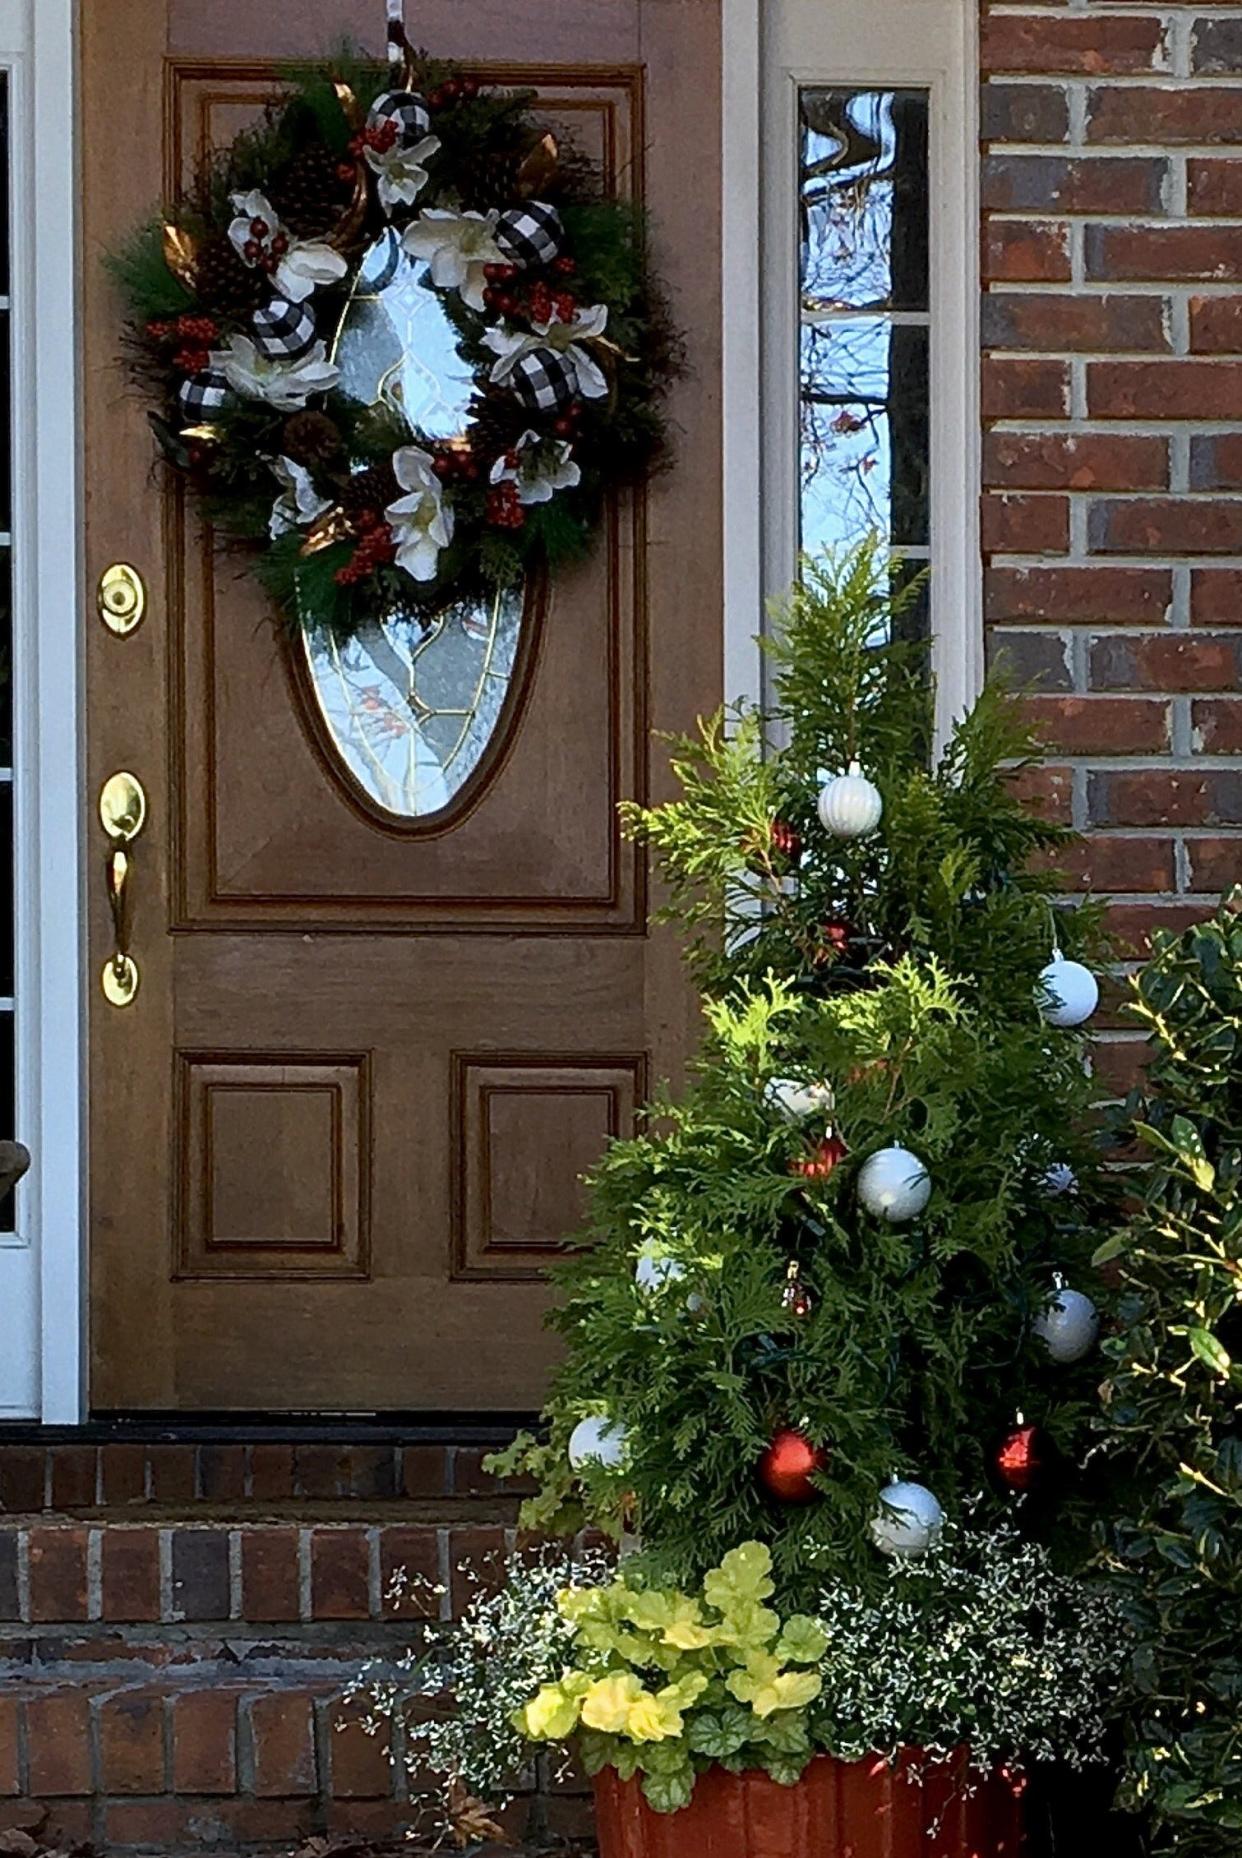 A ‘Living Christmas Tree’ is the perfect way to say welcome.